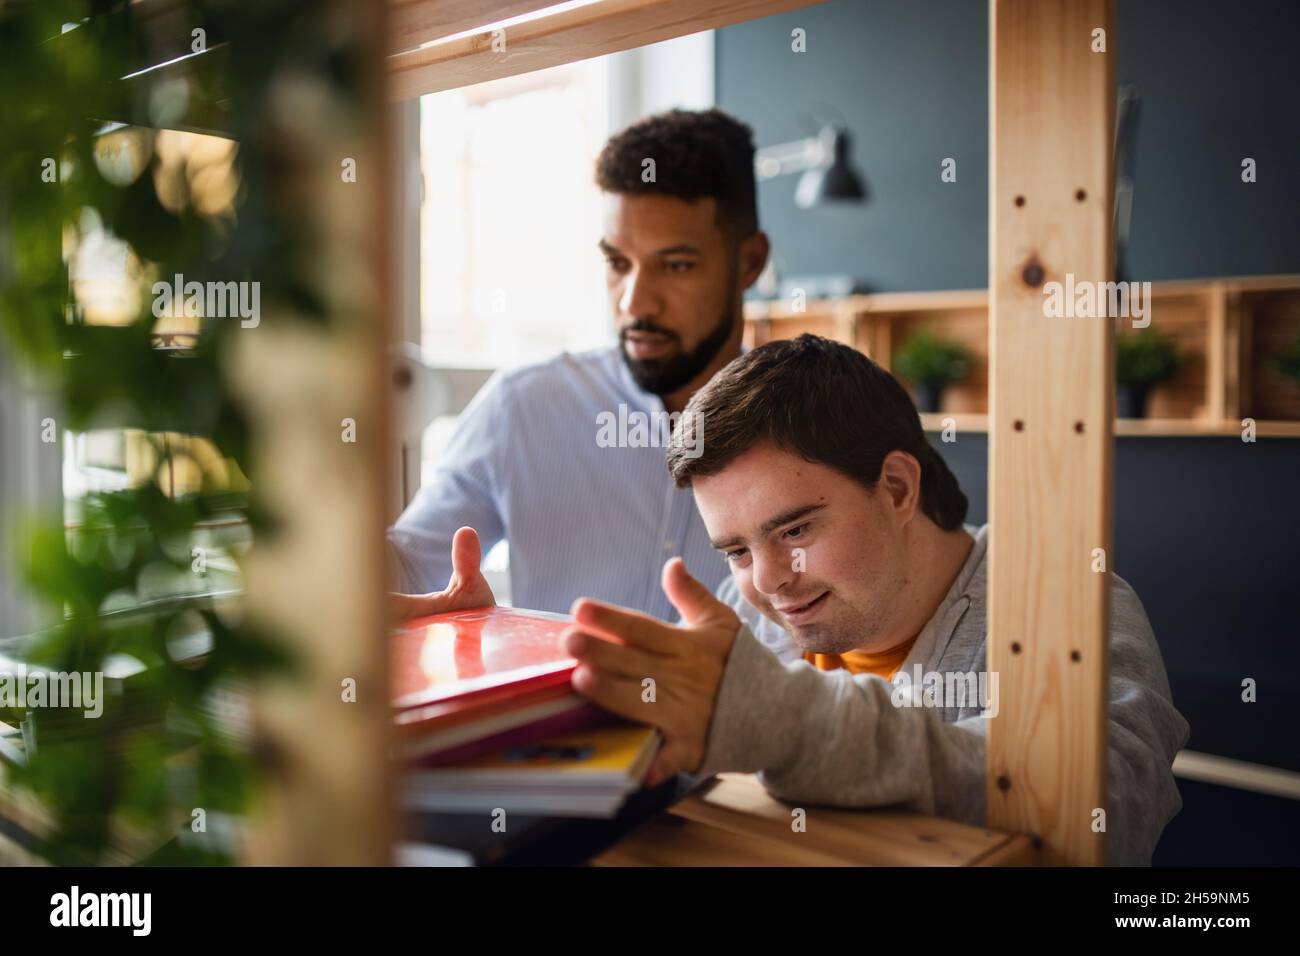 Young happy man with Down syndrome and his tutor indoors at staffroom. Stock Photo